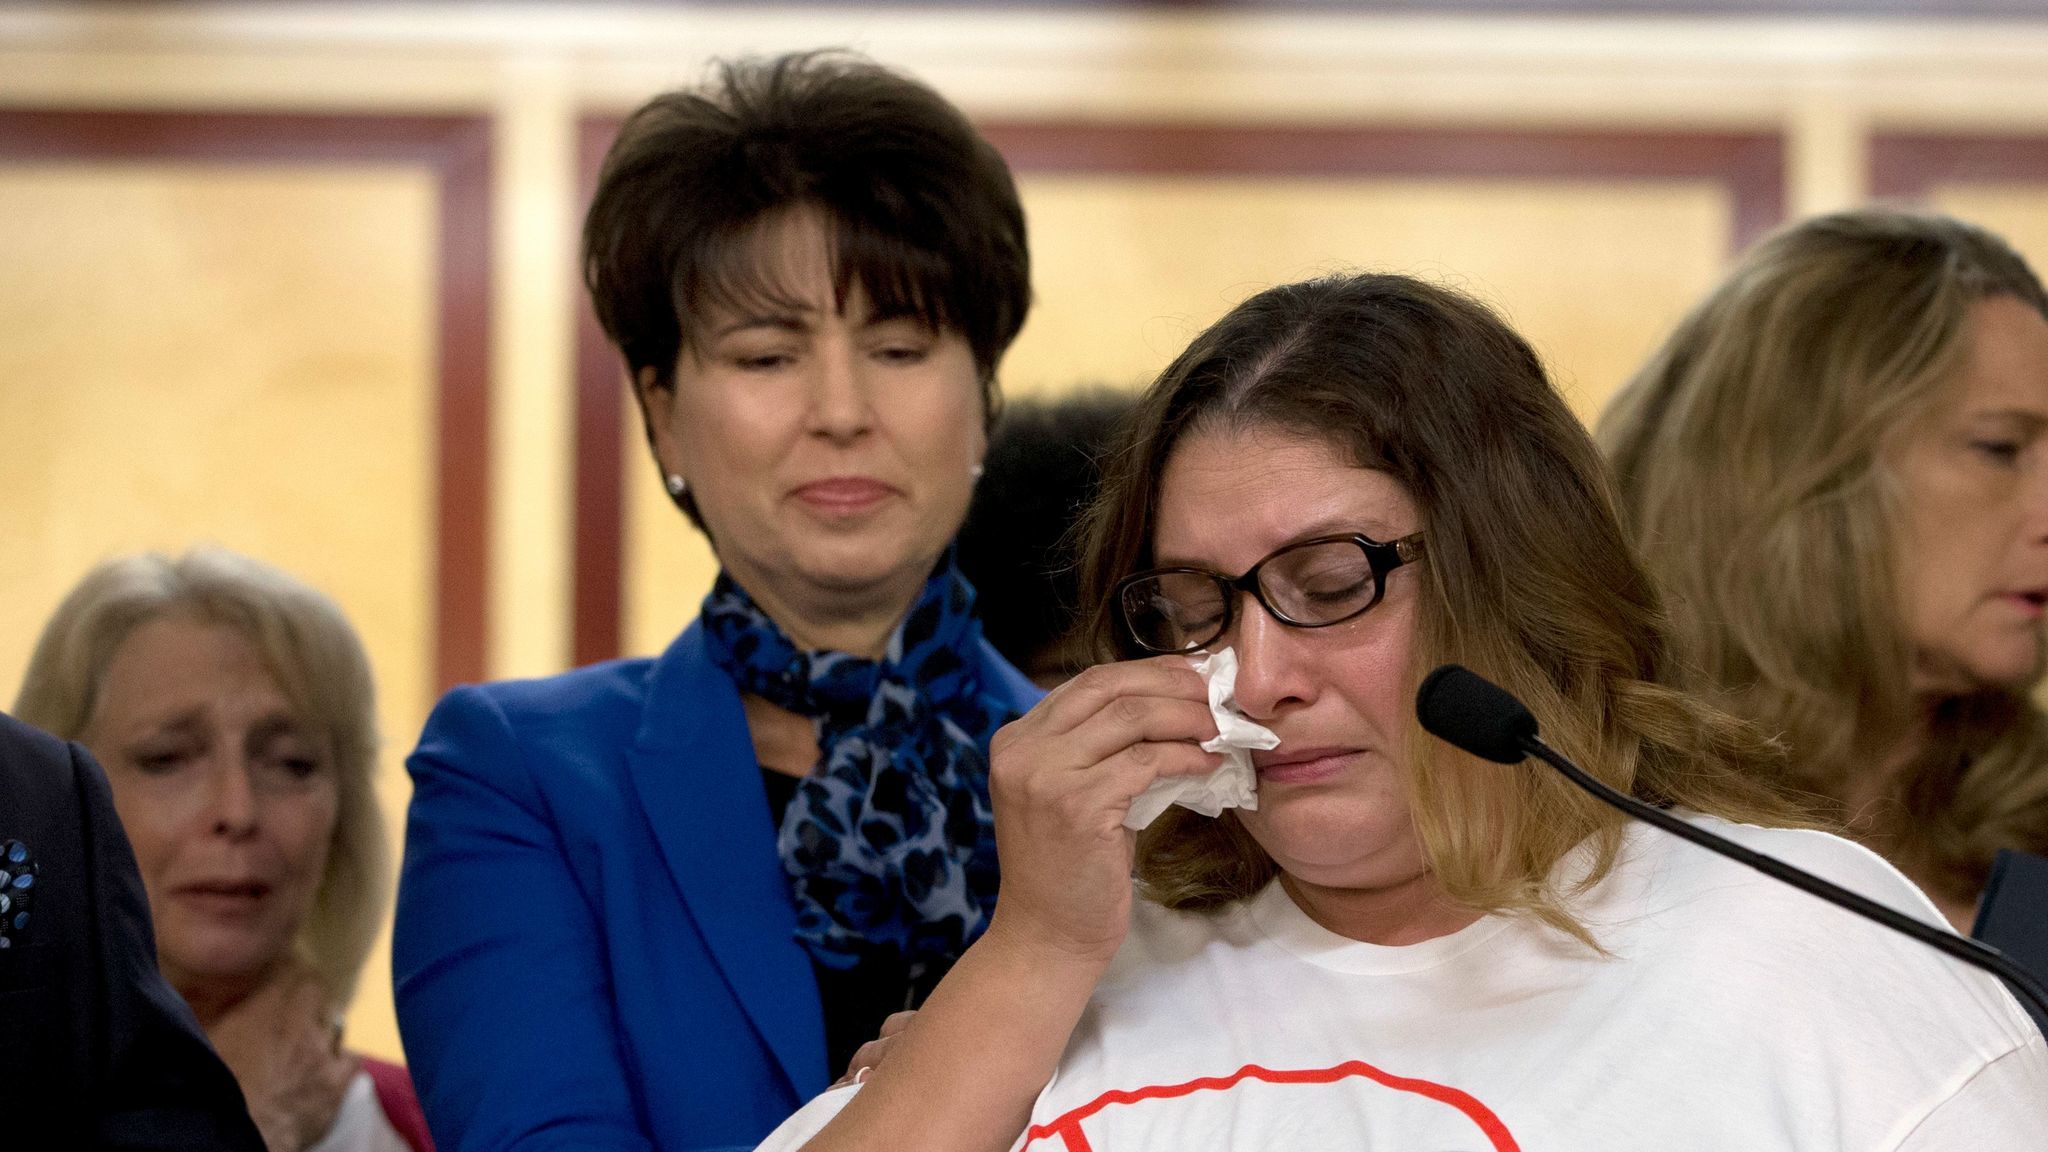 Norma Hernandez, backed by state Sen. Connie Leyva (D-Chino), wipes her eyes as she talks at a September 2016 news conference about being raped when she was 13. Leyva sponsored a bill that ended California's statute of limitation in some rape cases.